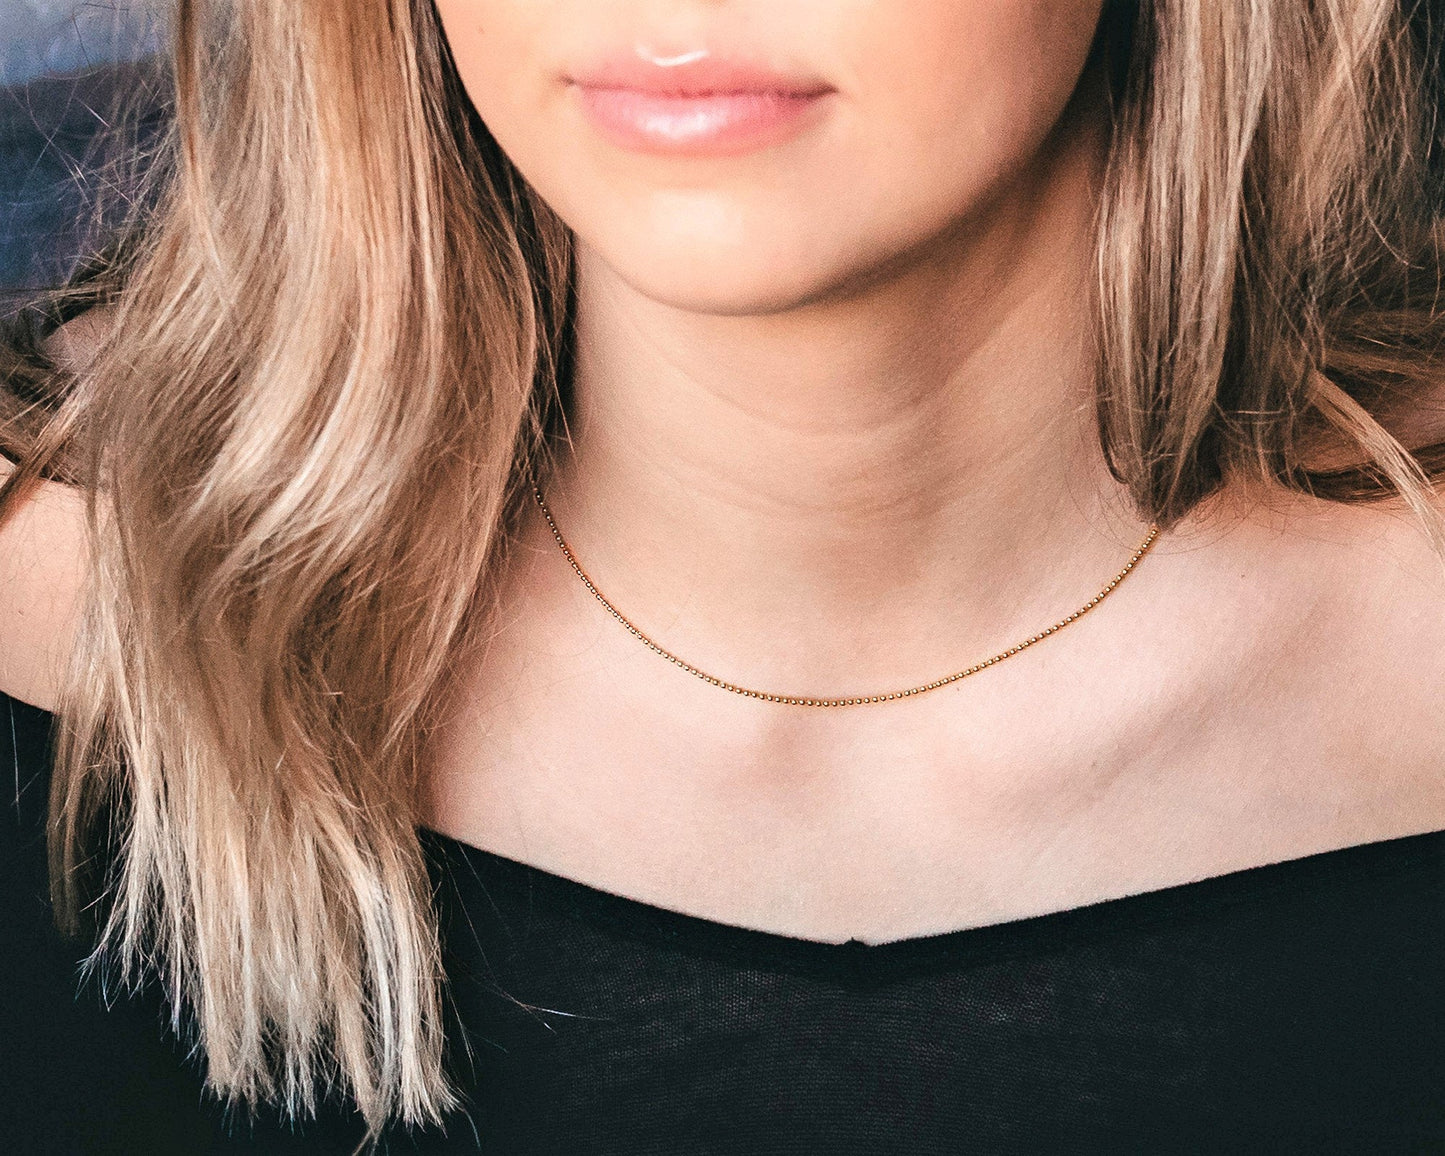 Dainty Gold Bead Chain Necklace, Gold Fill Ball Necklace, Gold Beaded Choker, Small Gold Beads Necklace, Small Gold Bead Layering Necklace - Anya Collection